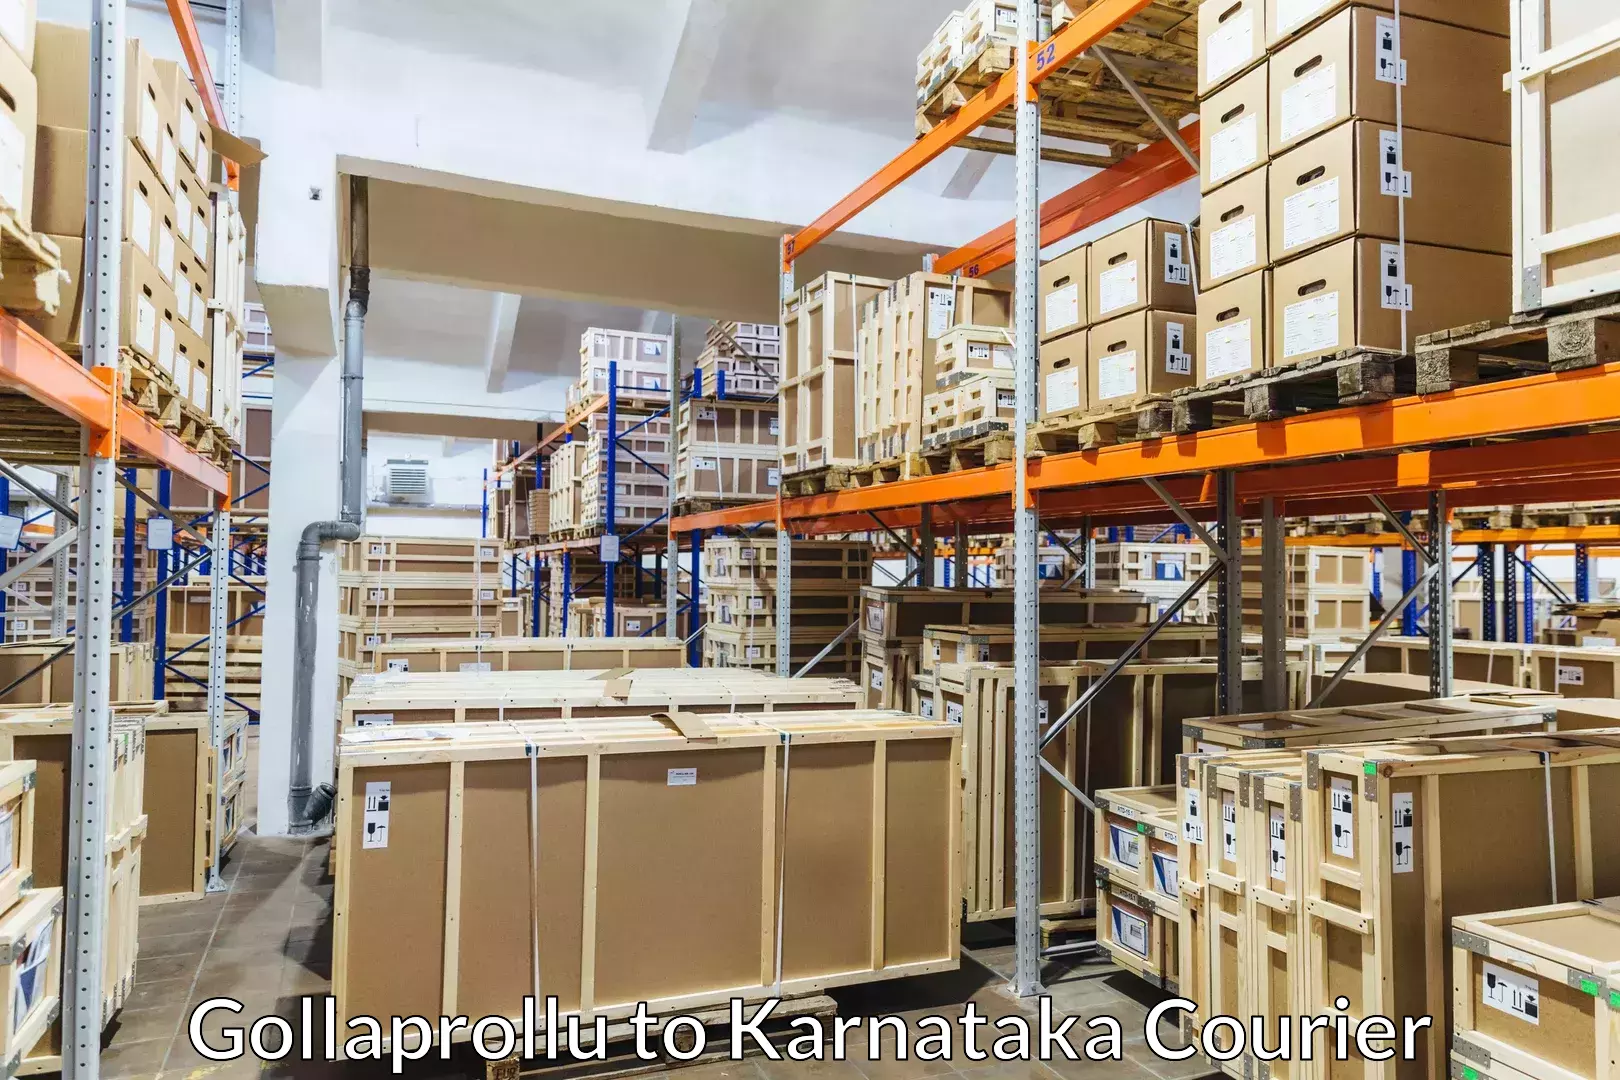 Cost-effective moving options Gollaprollu to Virajpet